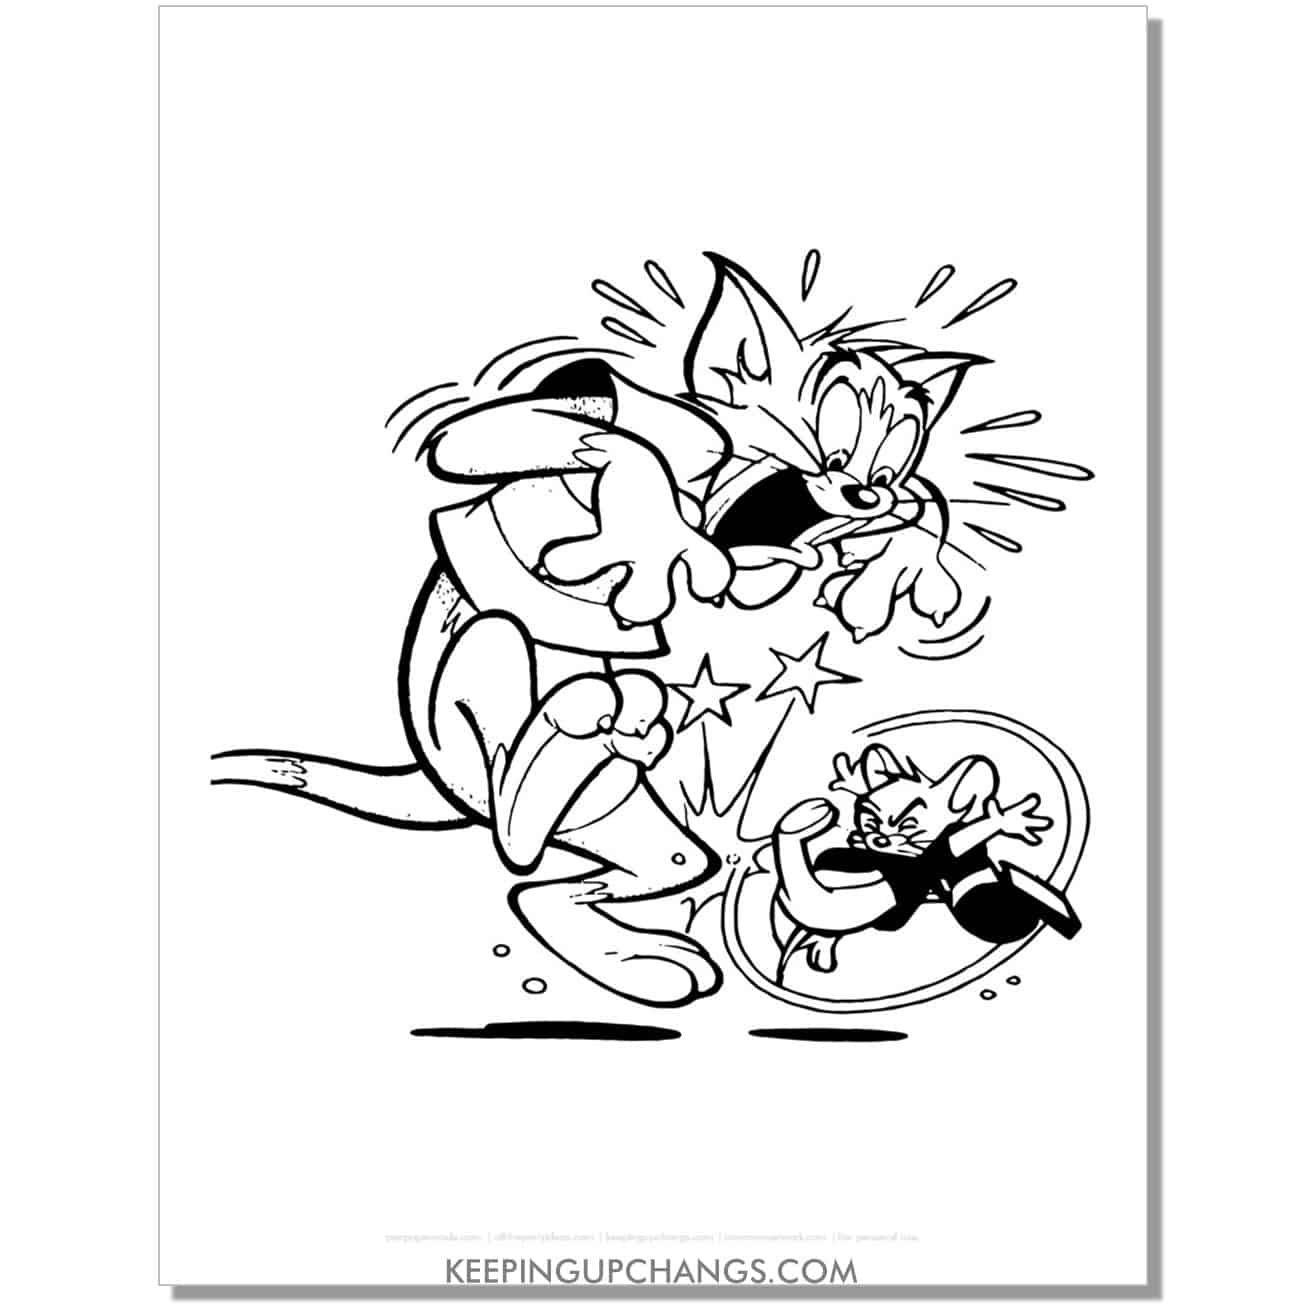 free tom and jerry kicked in knee coloring page.